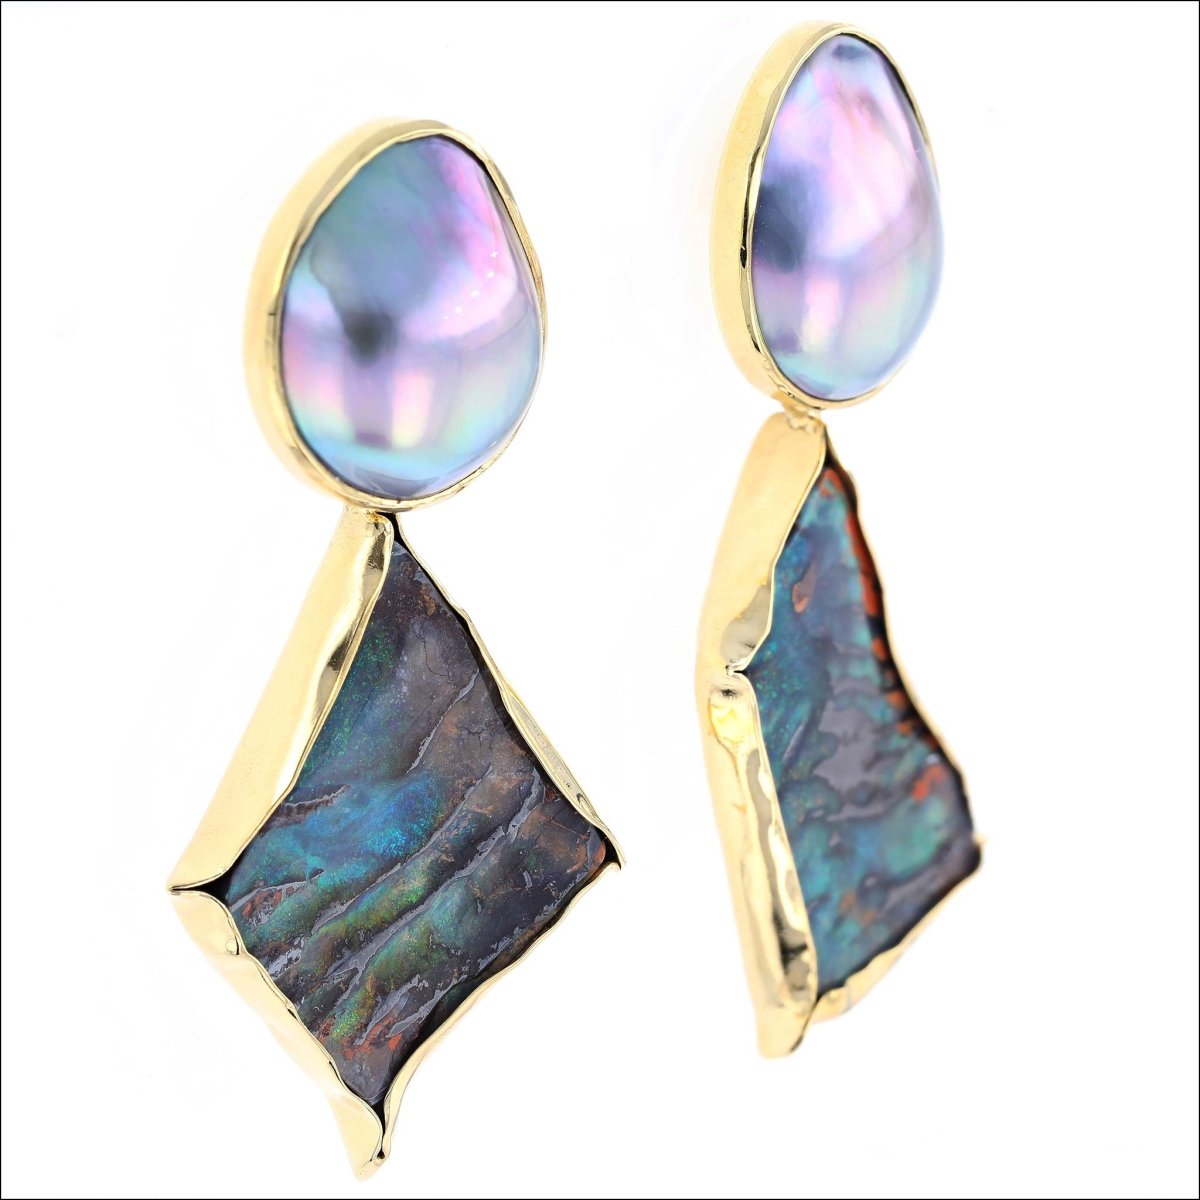 Boulder Opal Earrings with Mabe Pearl Removeable Tops 18KY 22KY - JewelsmithEarrings